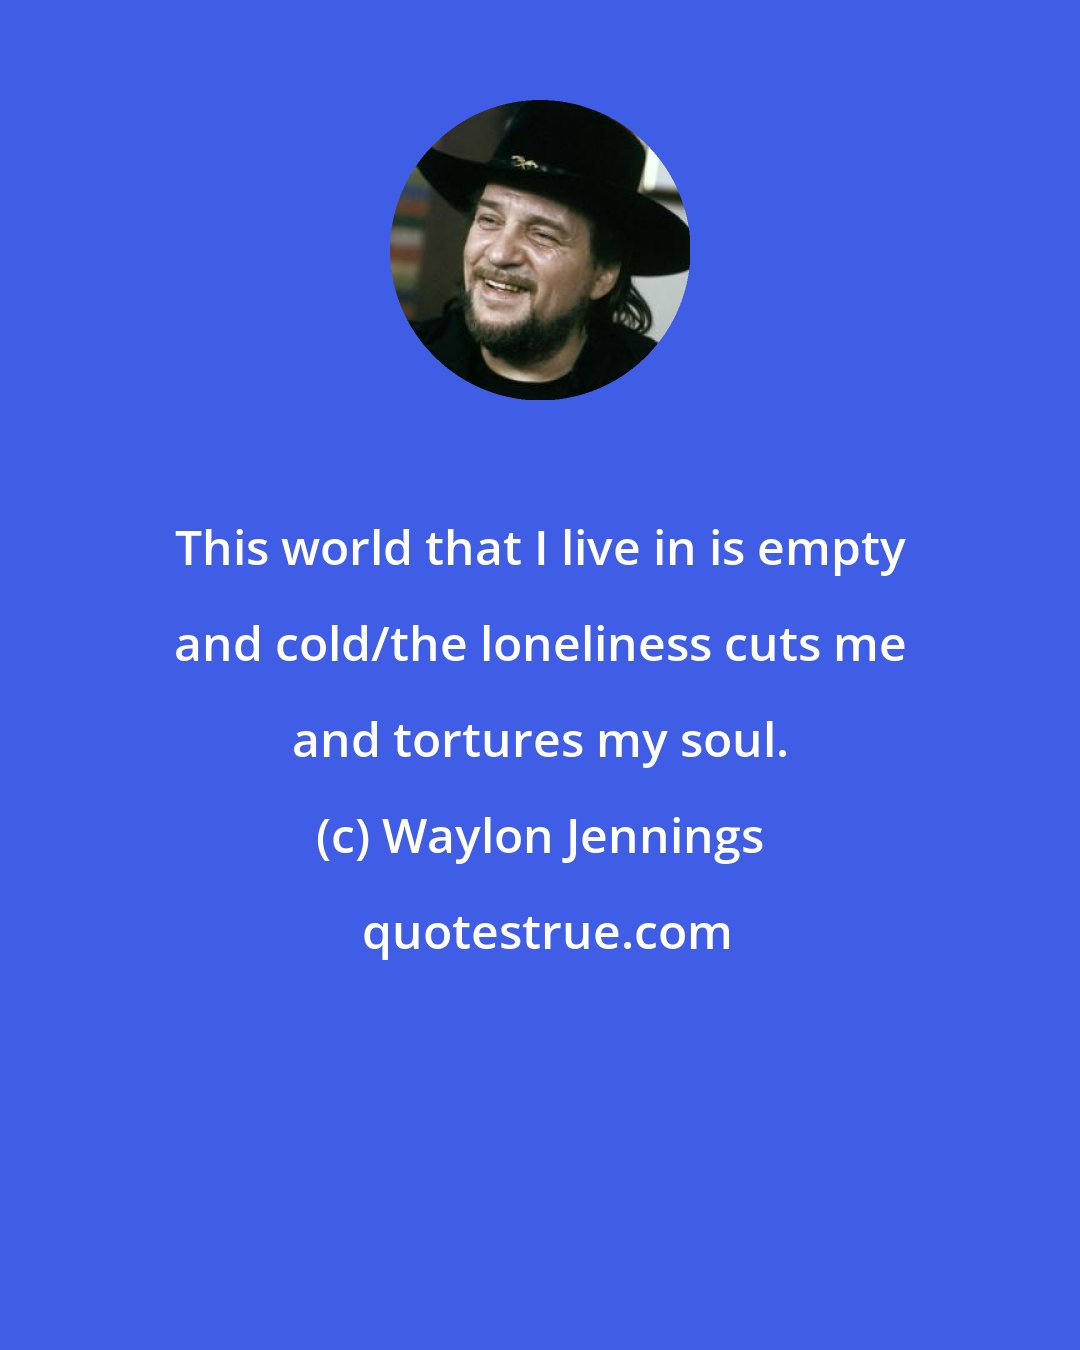 Waylon Jennings: This world that I live in is empty and cold/the loneliness cuts me and tortures my soul.